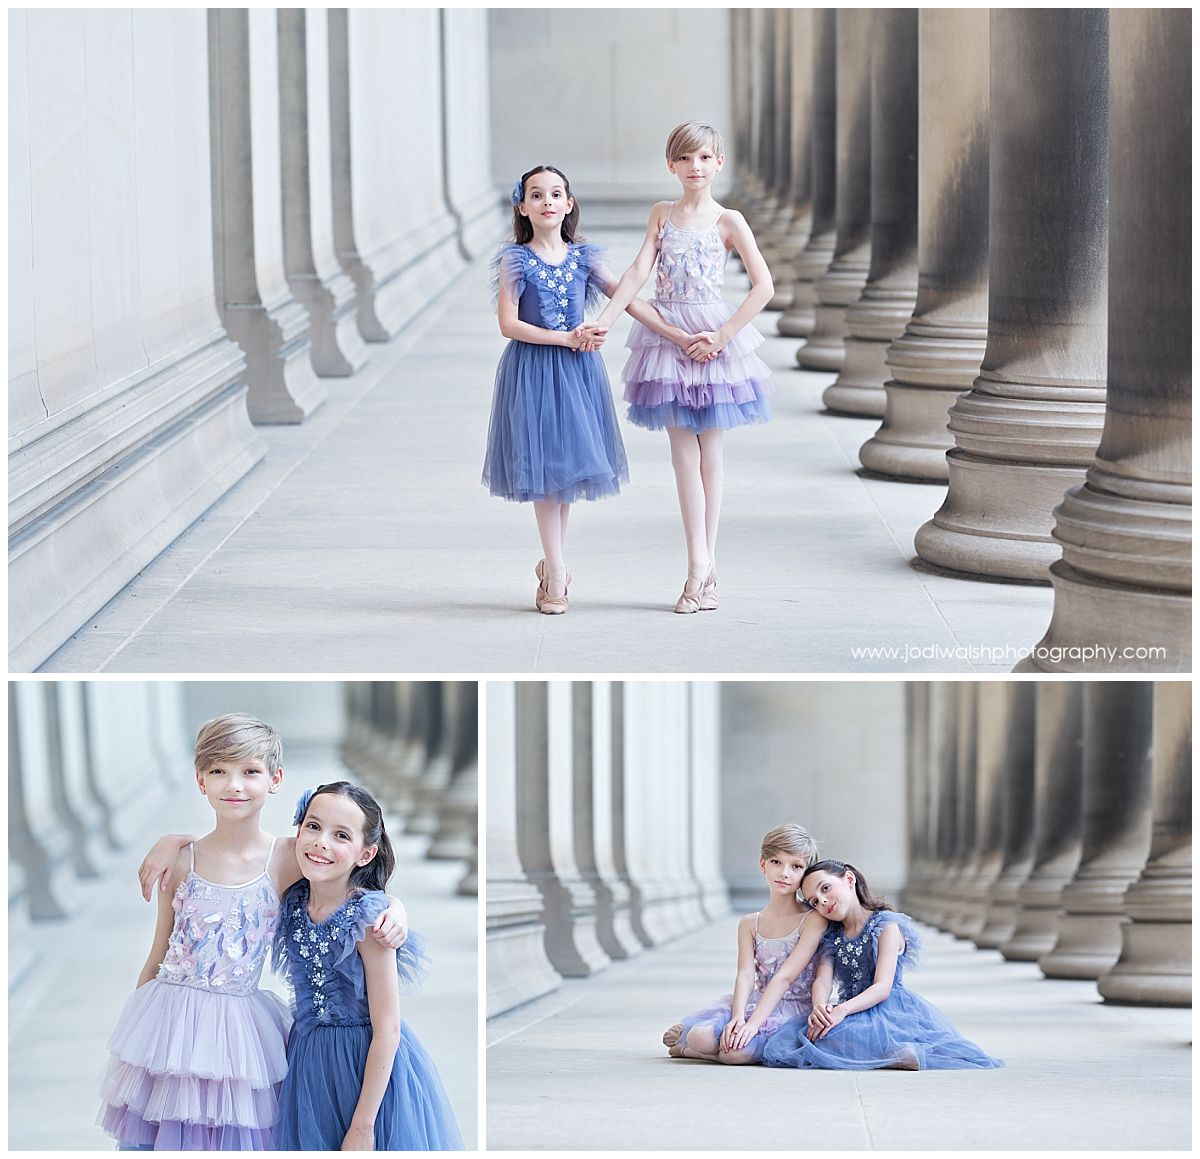 collage of images of two young girls, wearing pink and blue tulle dresses, dancing in a long hallway with stone columns, smiling with arms around each other's shoulders, sitting with heads resting on each other's shoulders